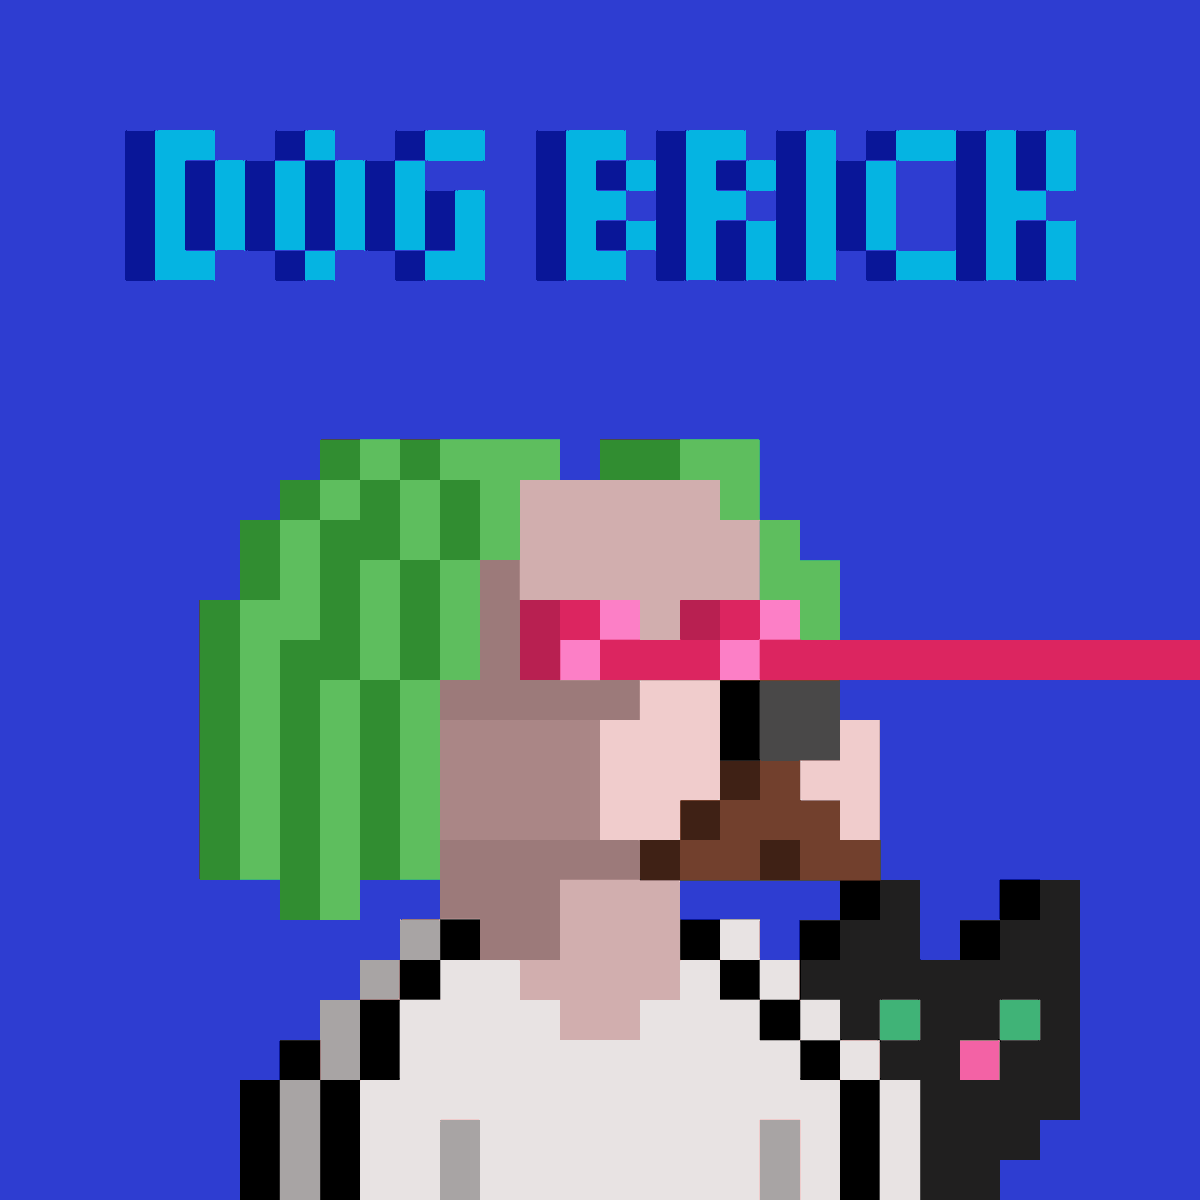 Very unique puppies are waiting.😍
🐶❤️DogBrick is coming soon.
🖐️Hang on :) ❤️❤️🤪
@OpenSea @base 💙
☑️ Follow me 🔥

#nftart #NFTs #nftcollector #opensea #NFTDROP #NFTartist #NFTCommunity #pixelart #NFT #OpenseaNFTs